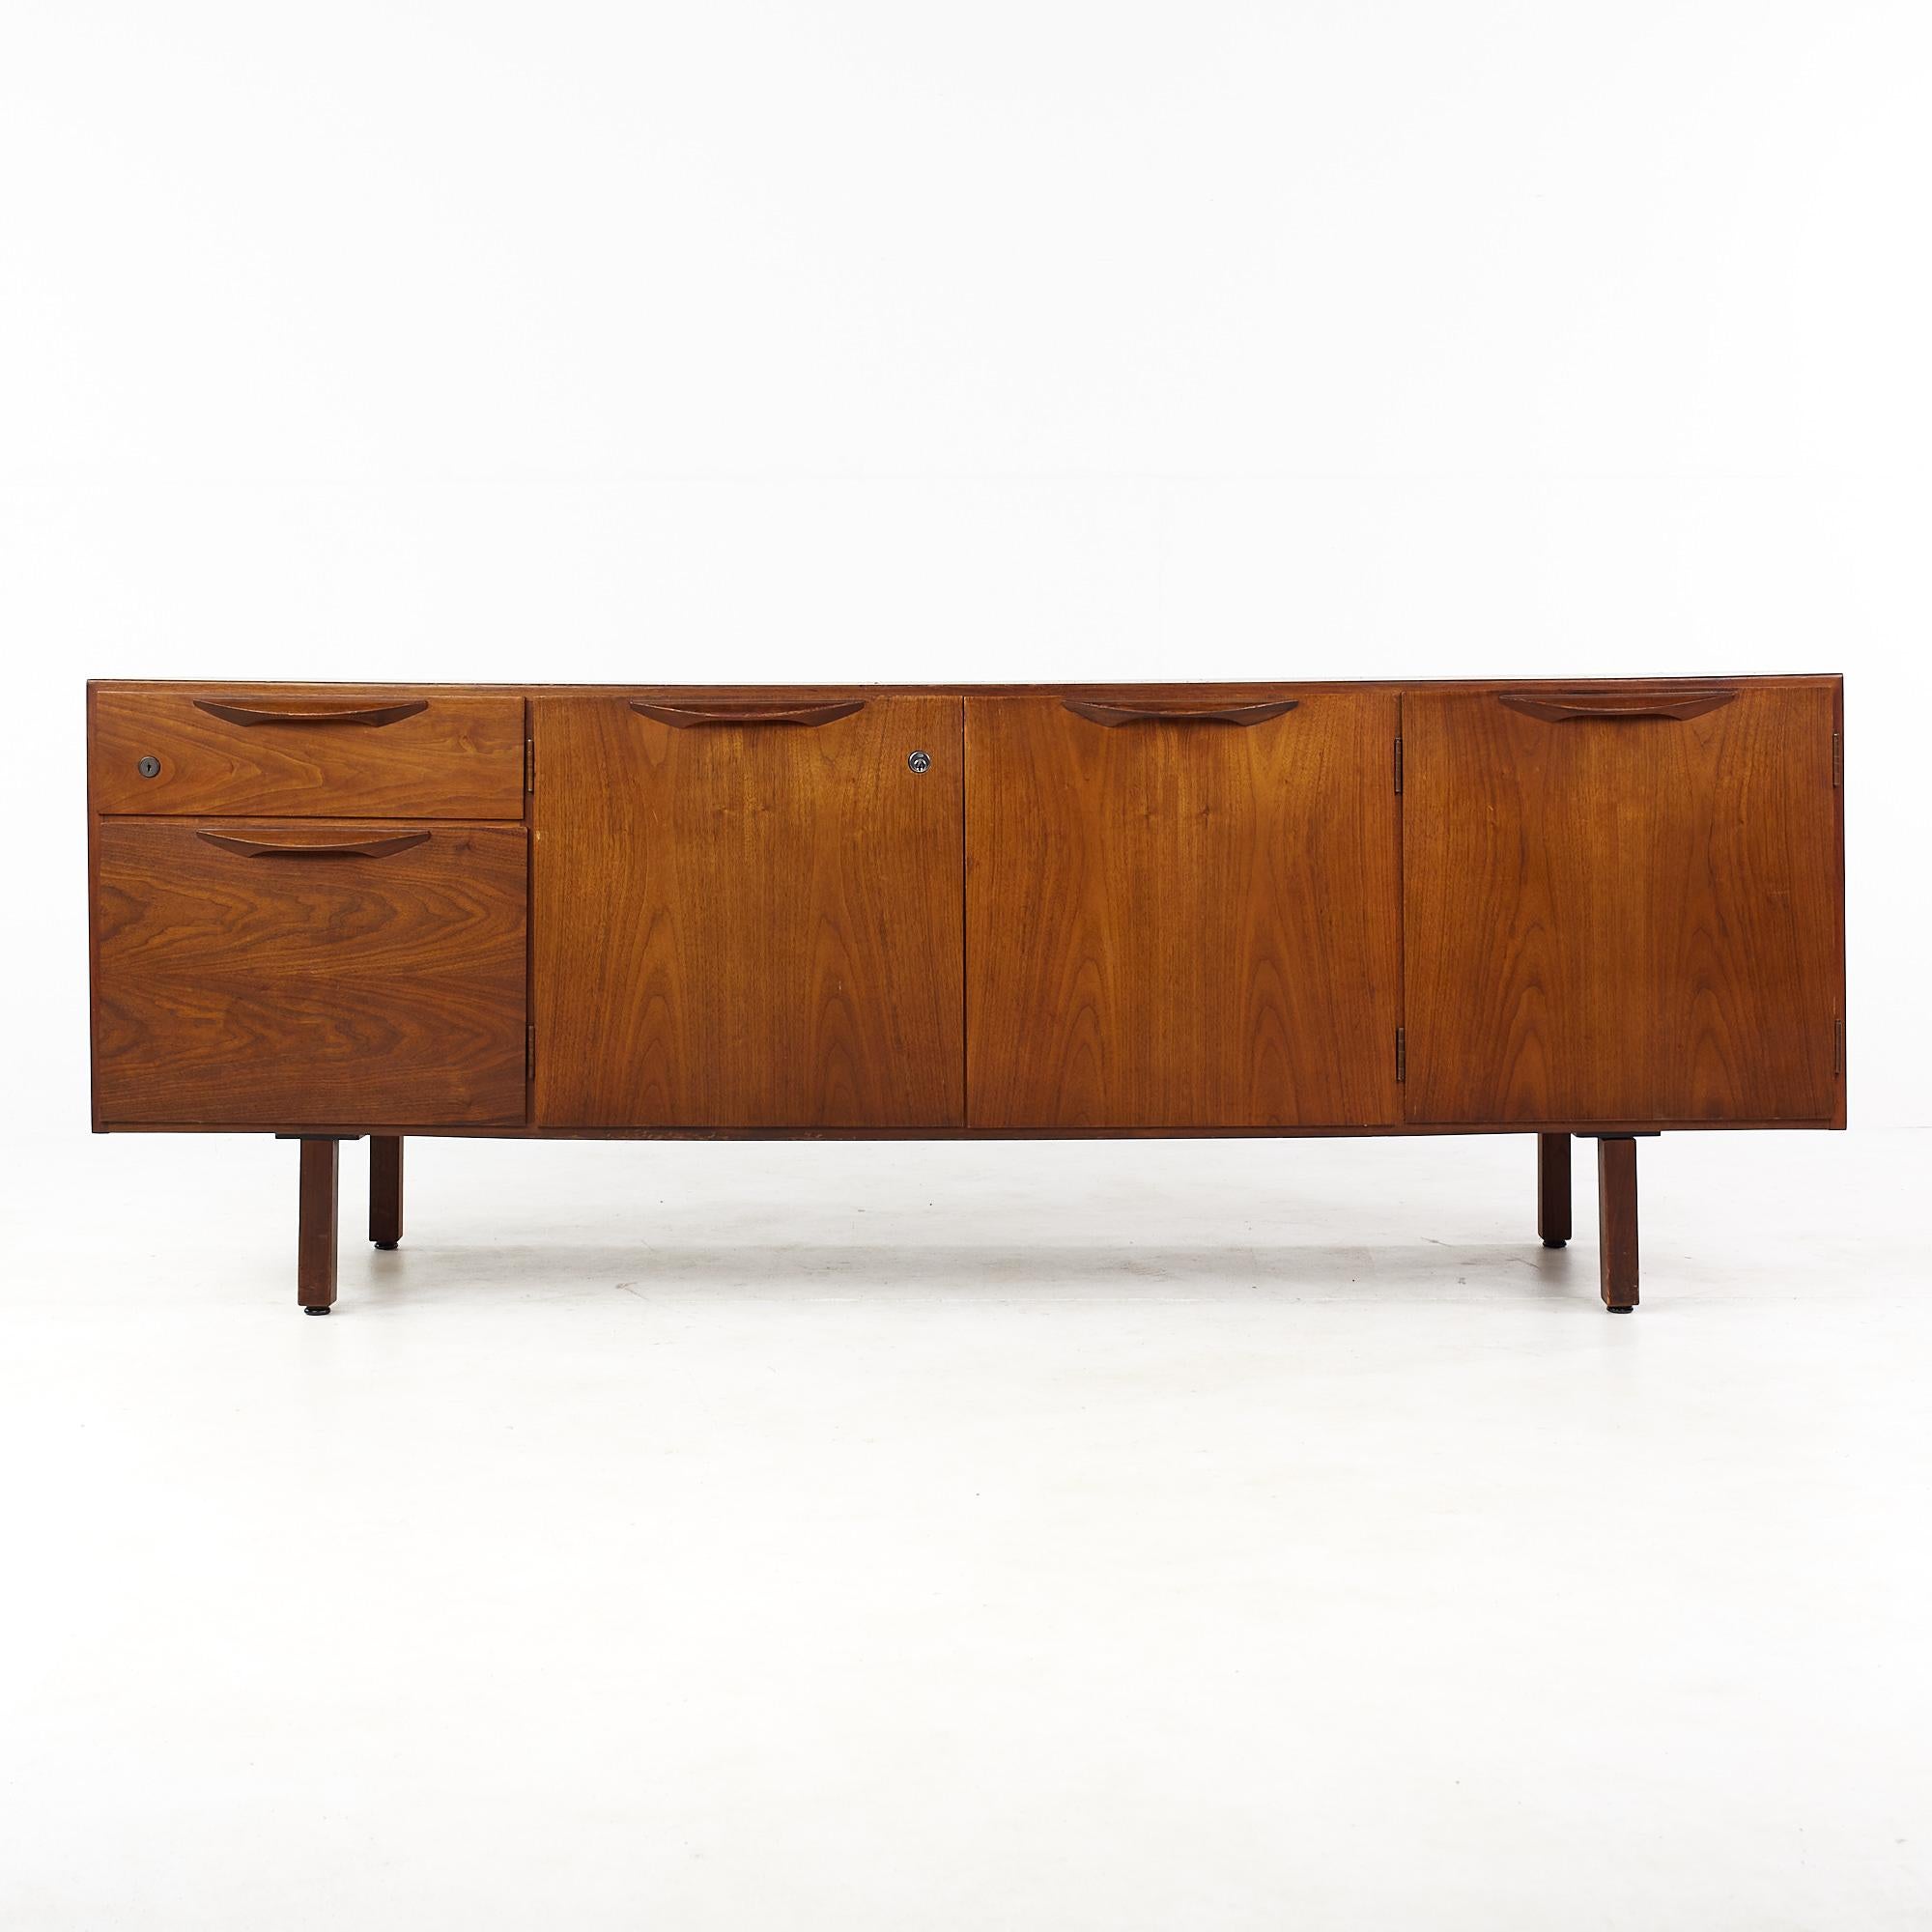 Jens Risom Mid Century walnut credenza

This credenza measures: 72 wide x 22 deep x 26 inches high

All pieces of furniture can be had in what we call restored vintage condition. That means the piece is restored upon purchase so it’s free of